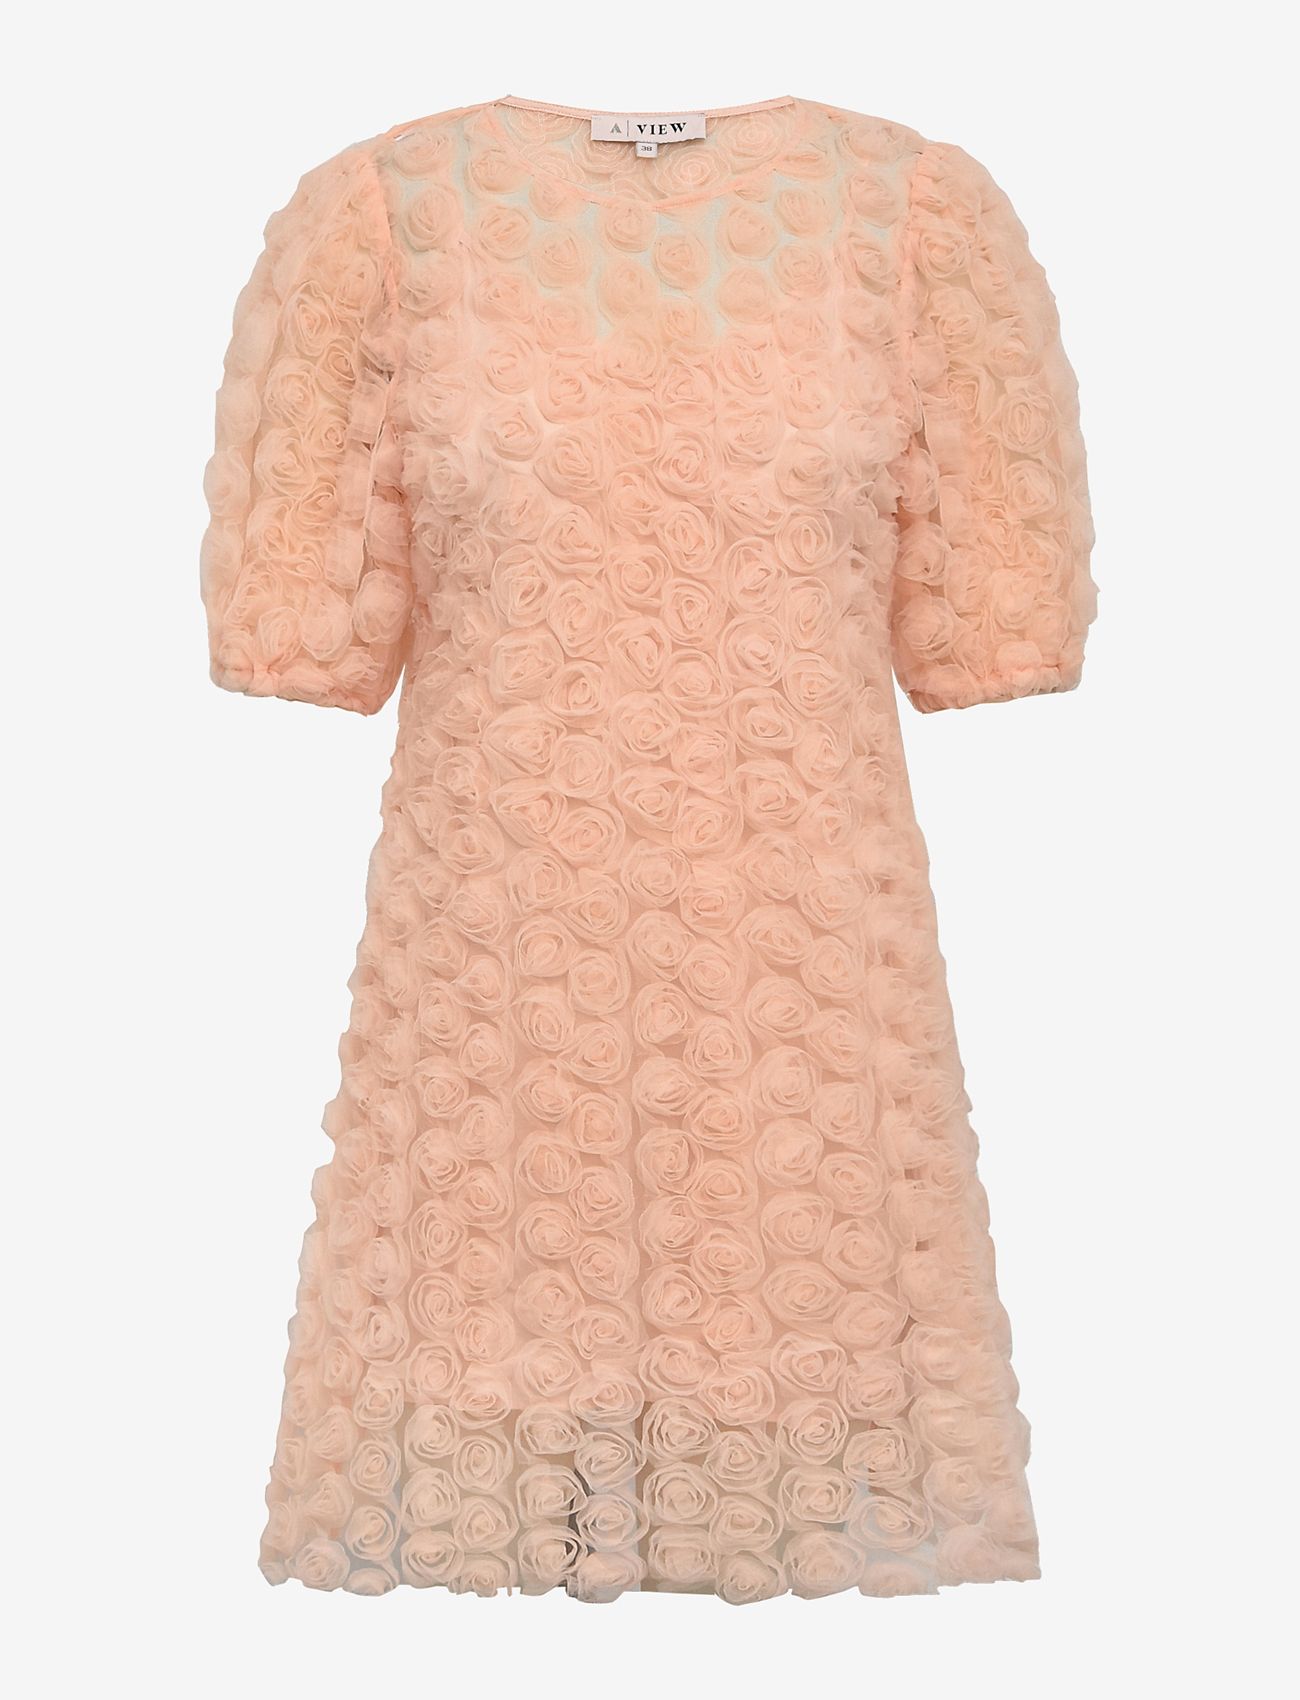 A-View - Maria dress - juhlamuotia outlet-hintaan - nude rose - 0